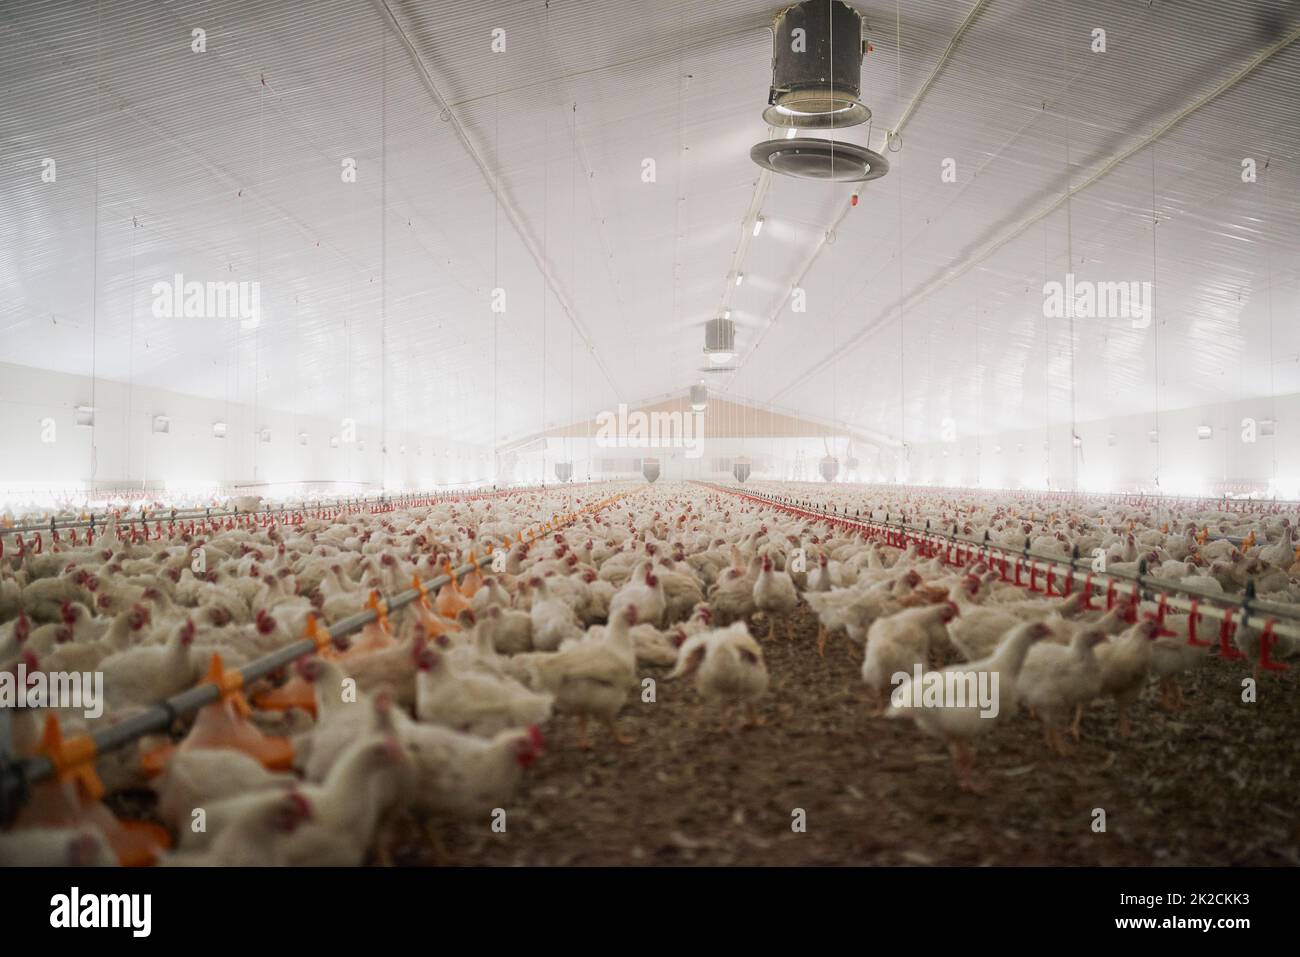 This is what a chicken party looks like. Shot of a large flock of chicken hens all together in a big warehouse on a farm. Stock Photo